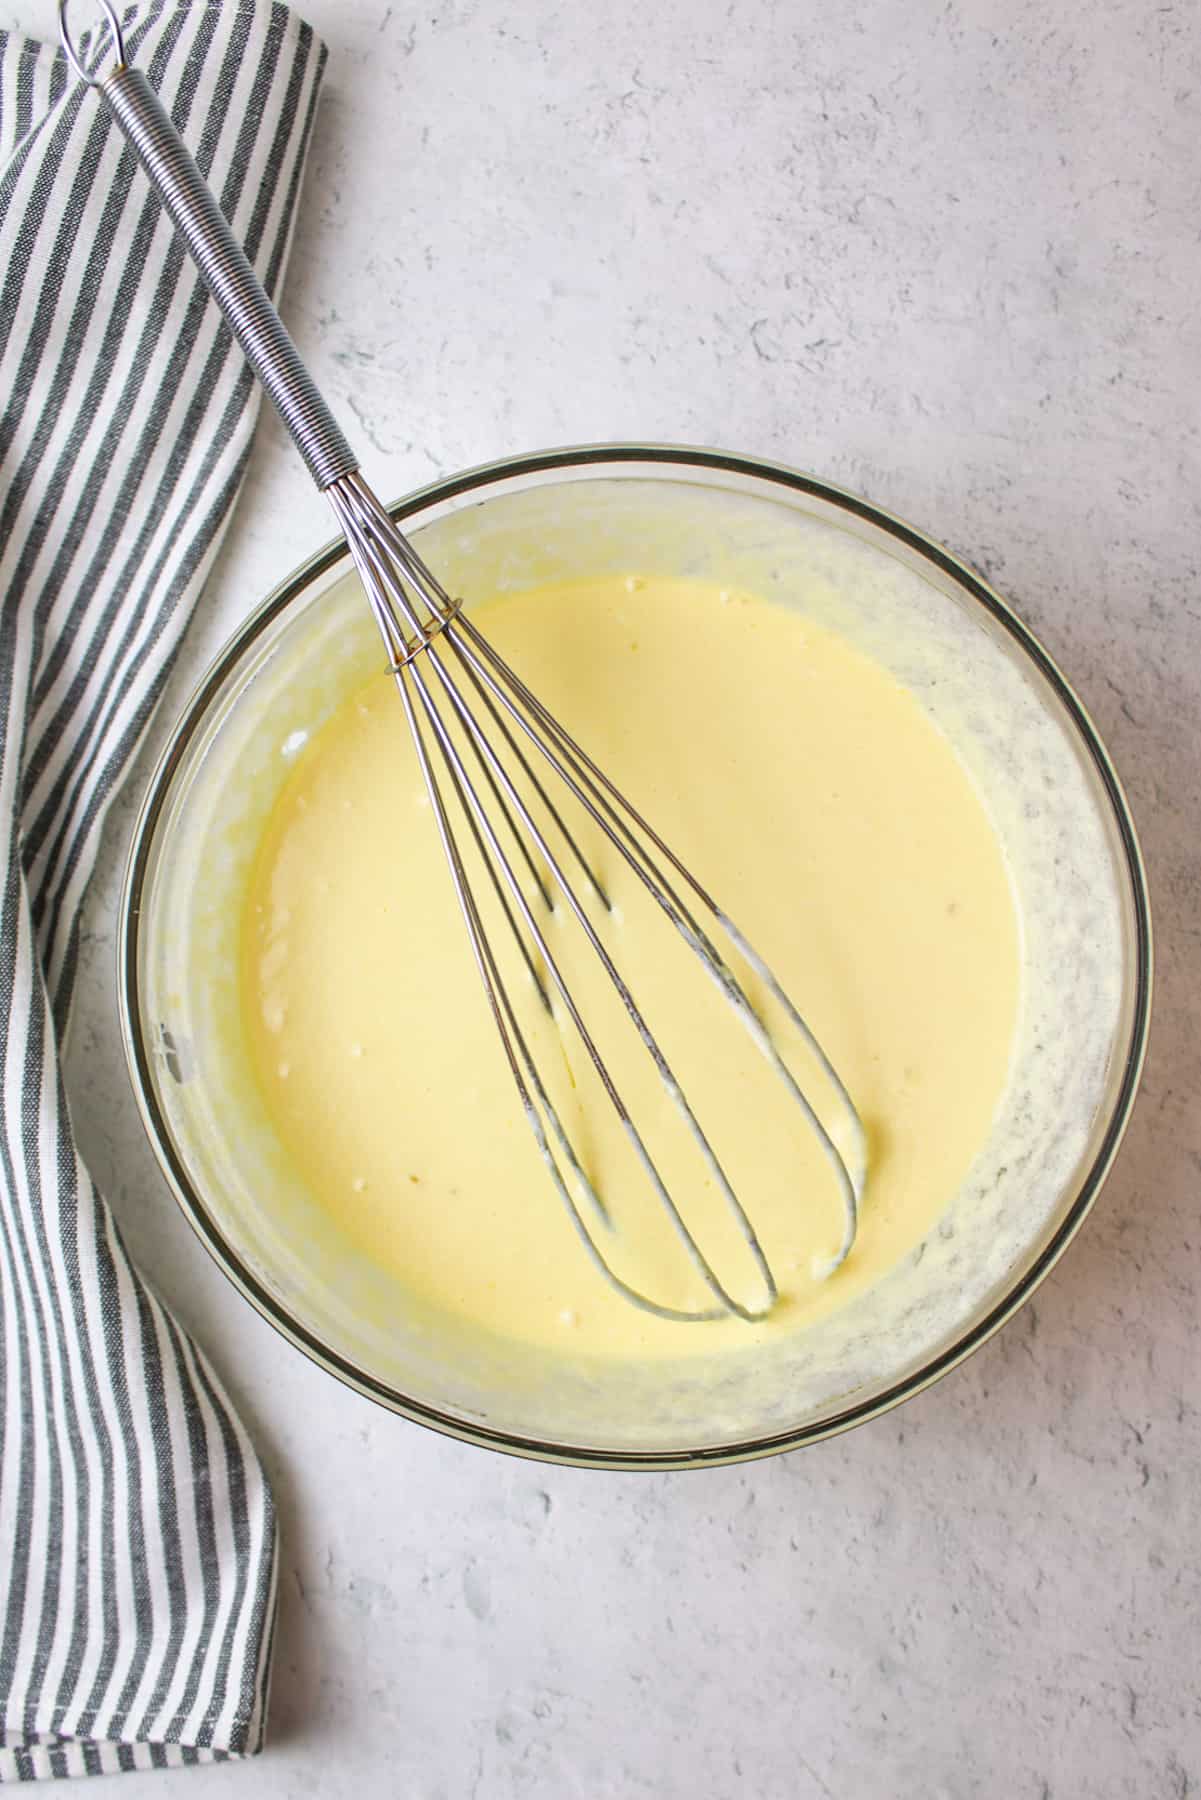 combined wet ingredients in a mixing bowl with a whisk